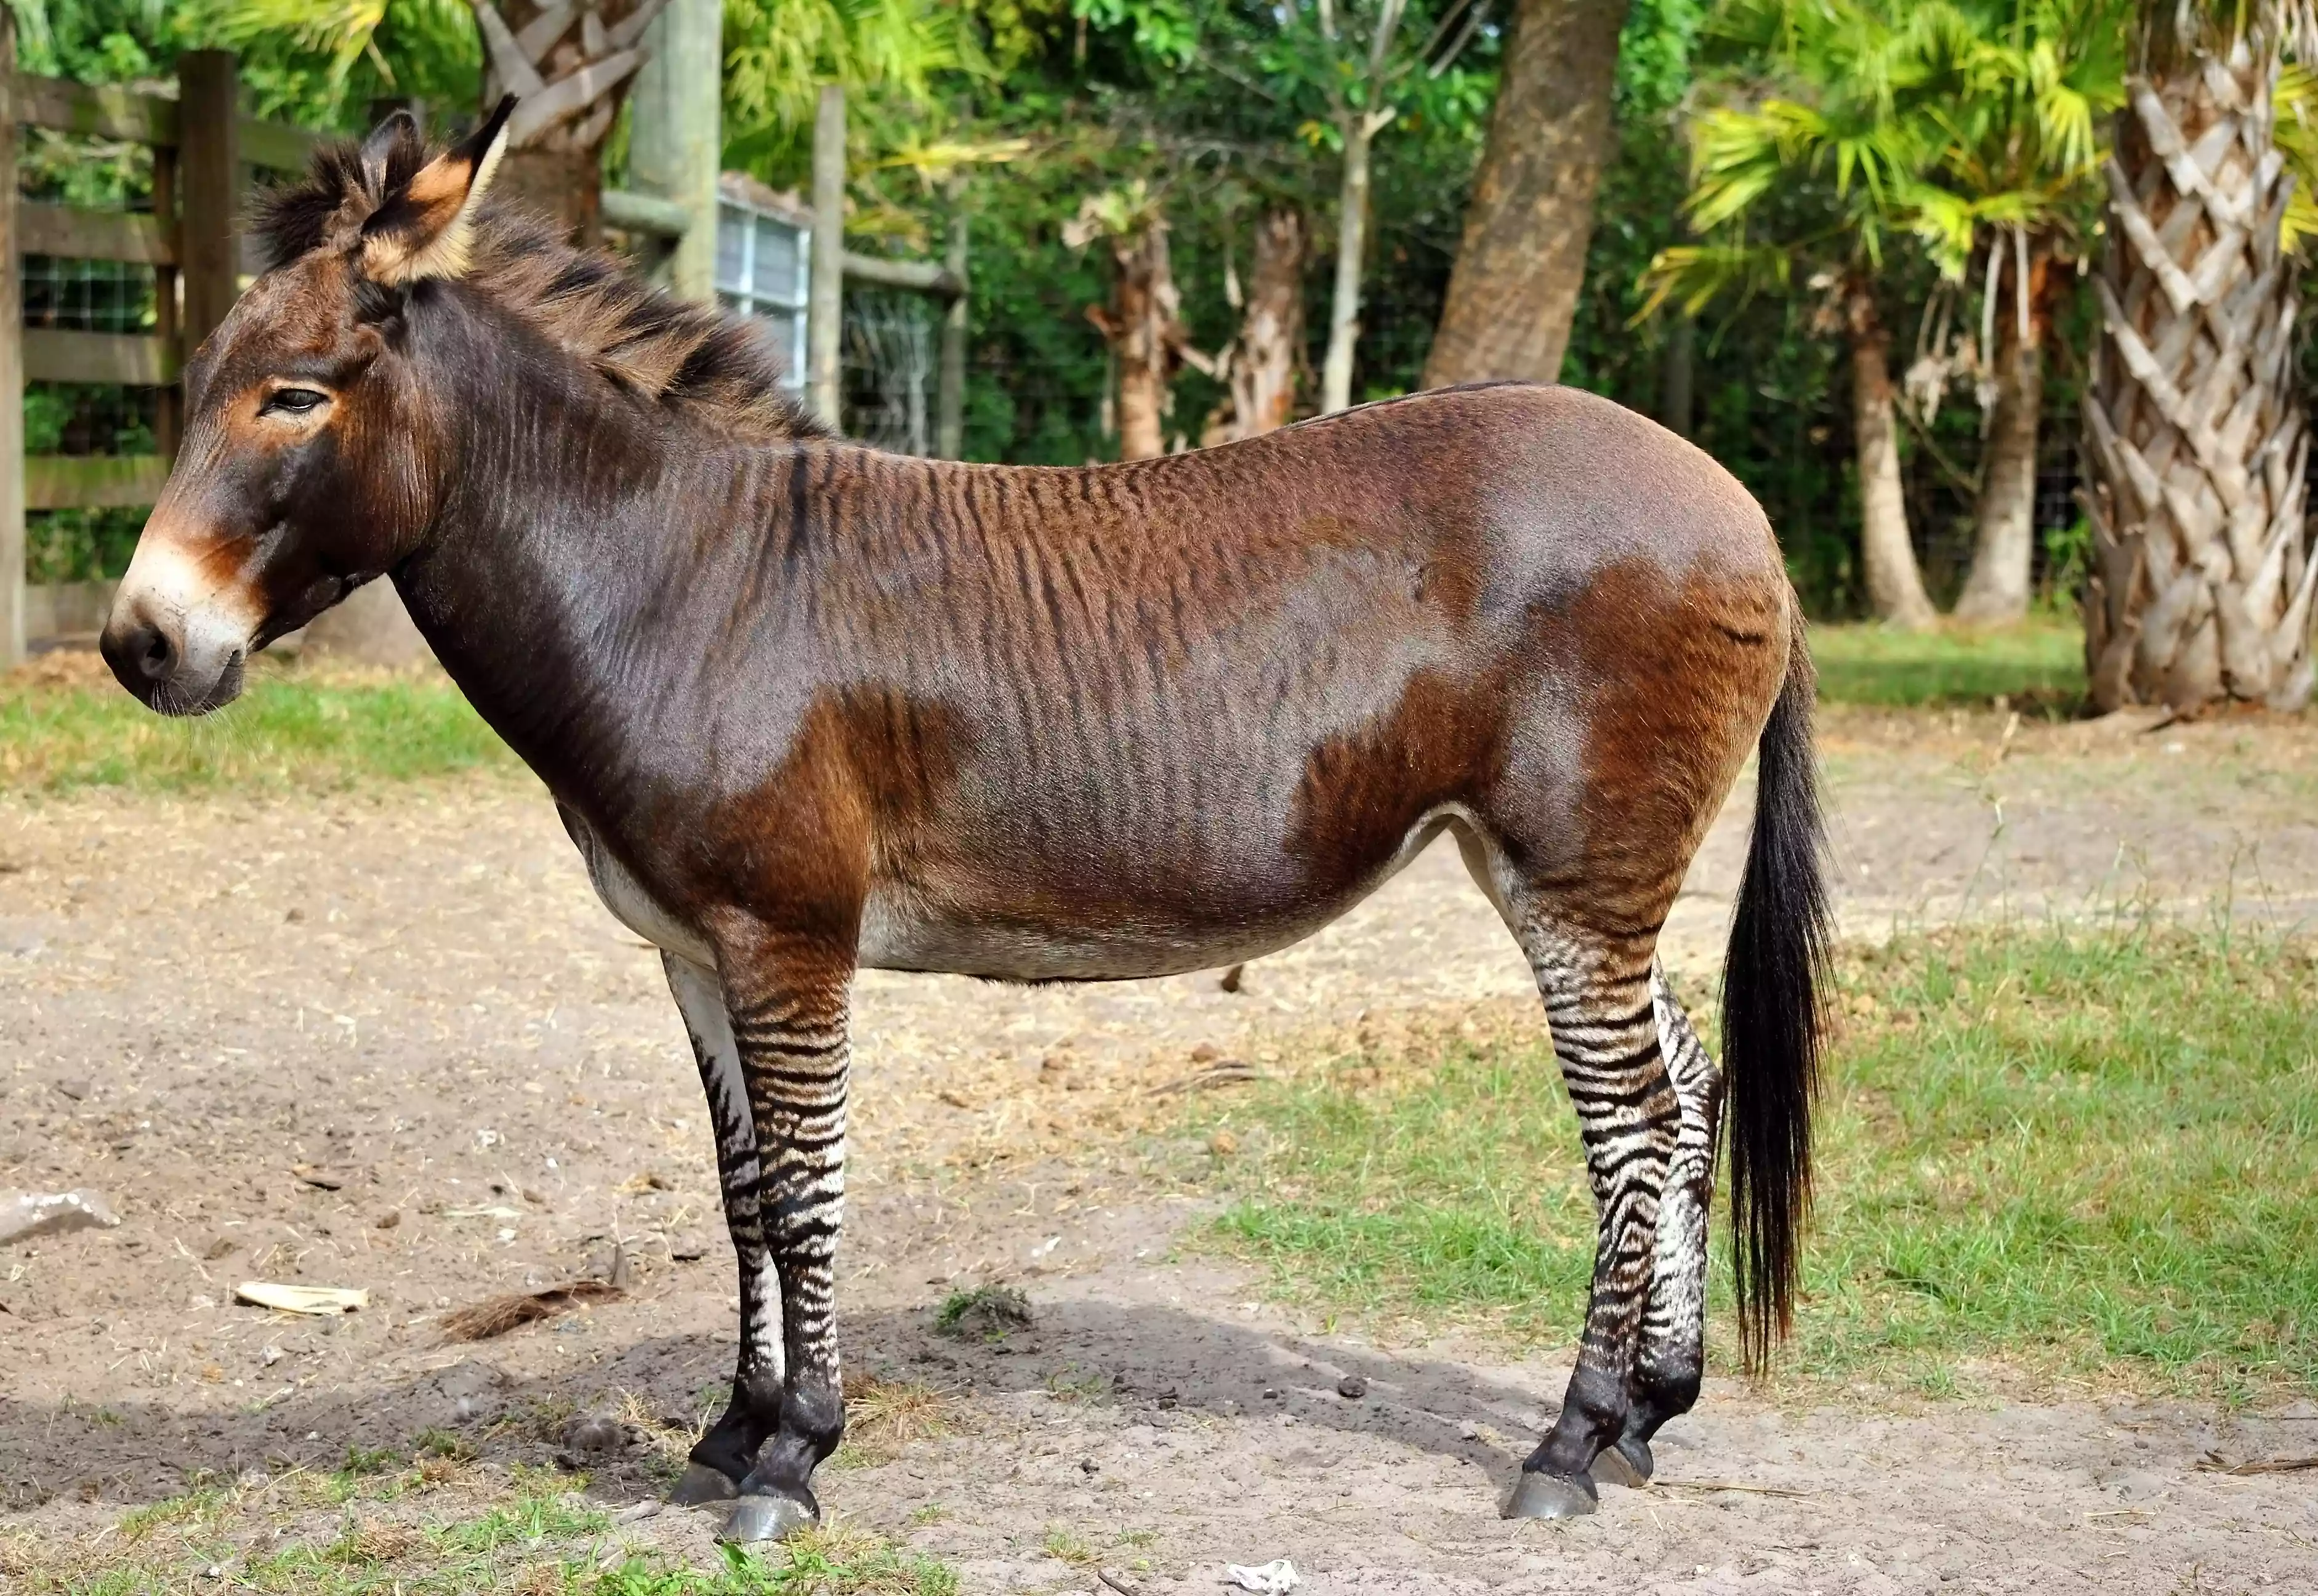 A cross between a zebra and a donkey with a brown body and striped black and white legs